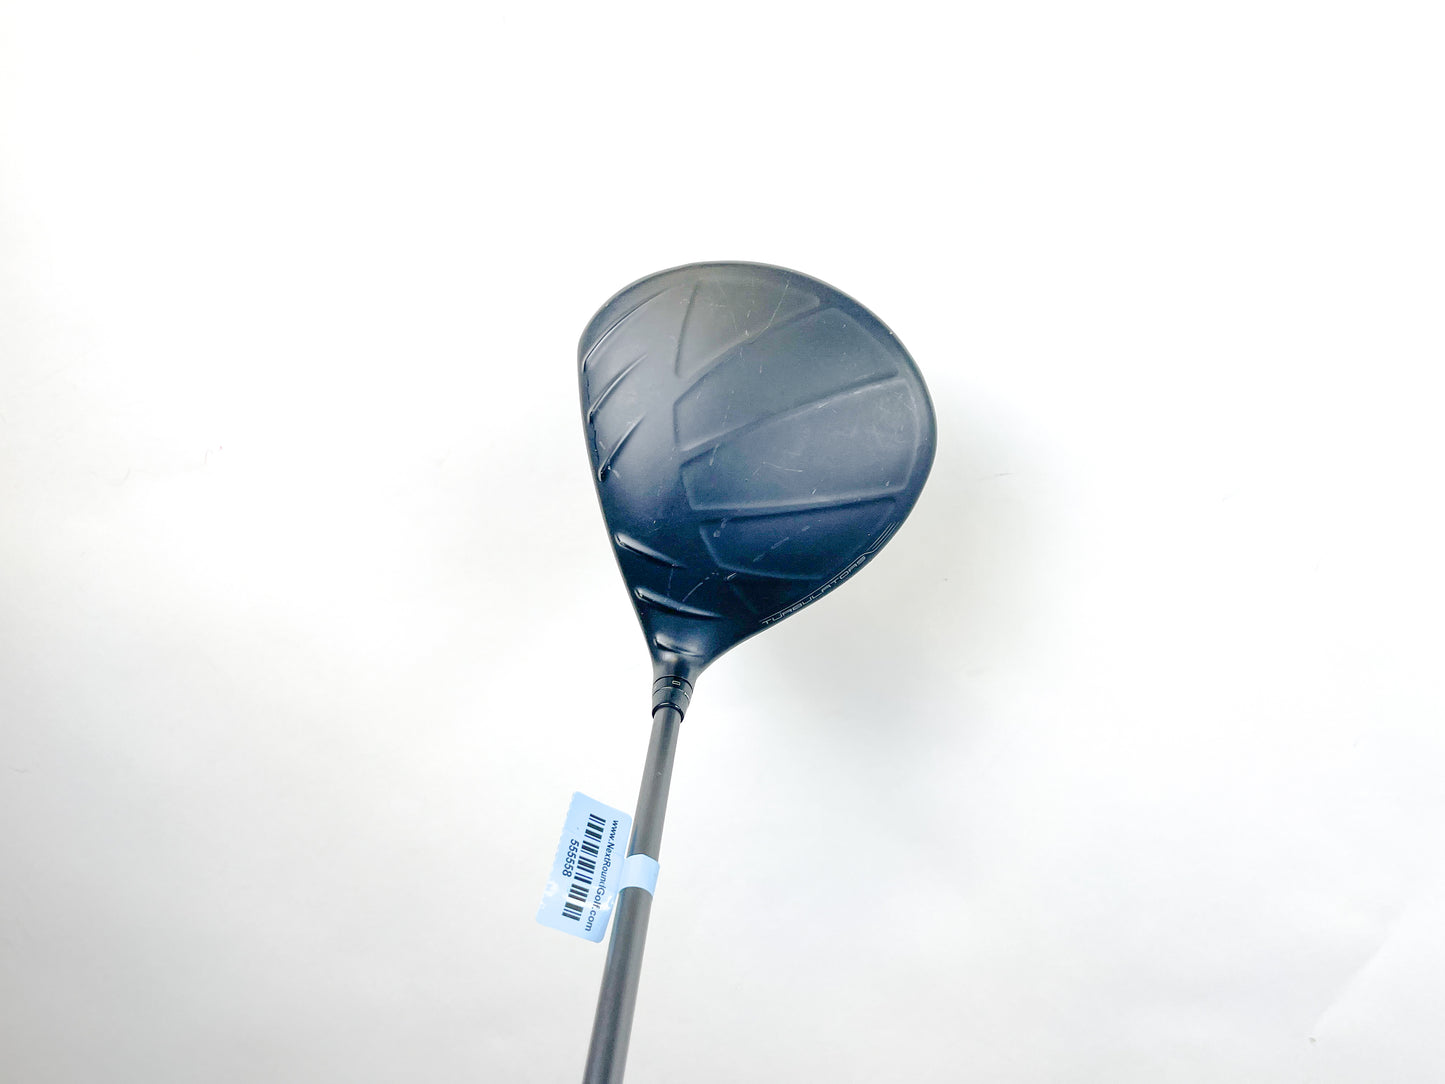 Used Ping G LS Tec Driver - Right-Handed - 9 Degrees - Stiff Flex-Next Round